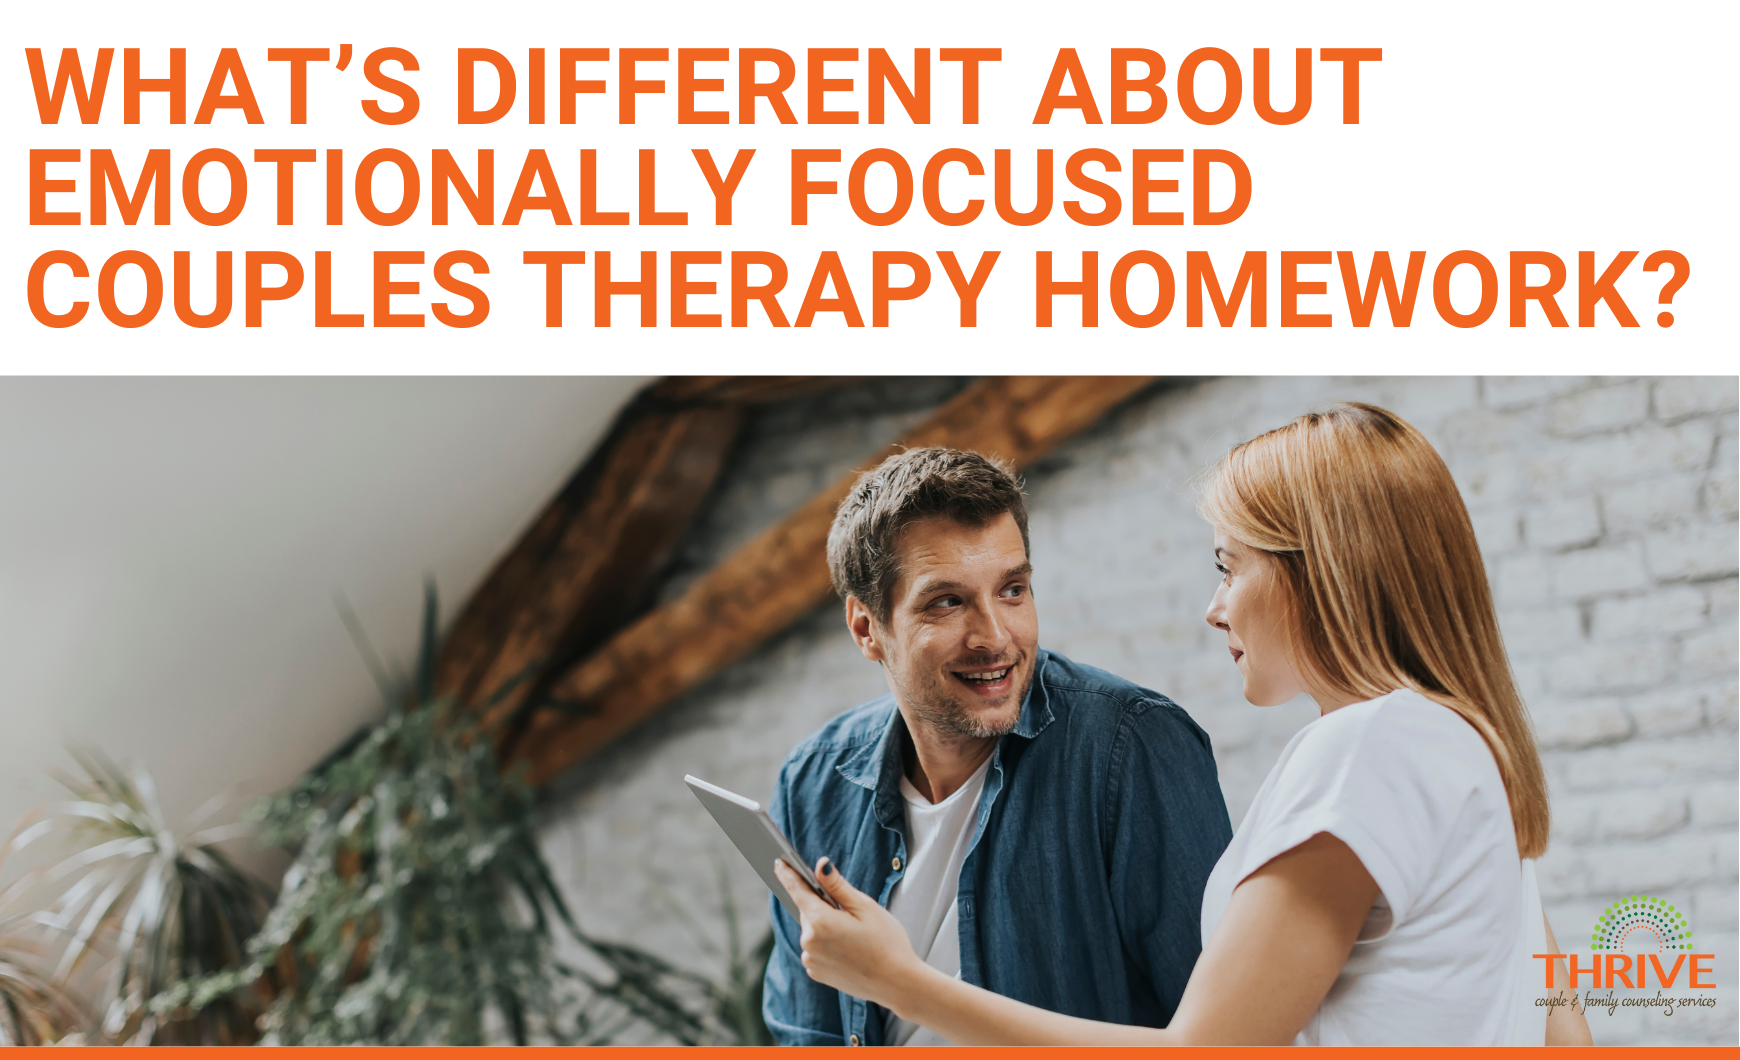 A graphic that reads "What’s Different About Emotionally Focused Couples Therapy Homework?" above a stock photo of a white couple in a bright white kitchen, looking at each other and smiling. The woman is holding a tablet device in one hand.